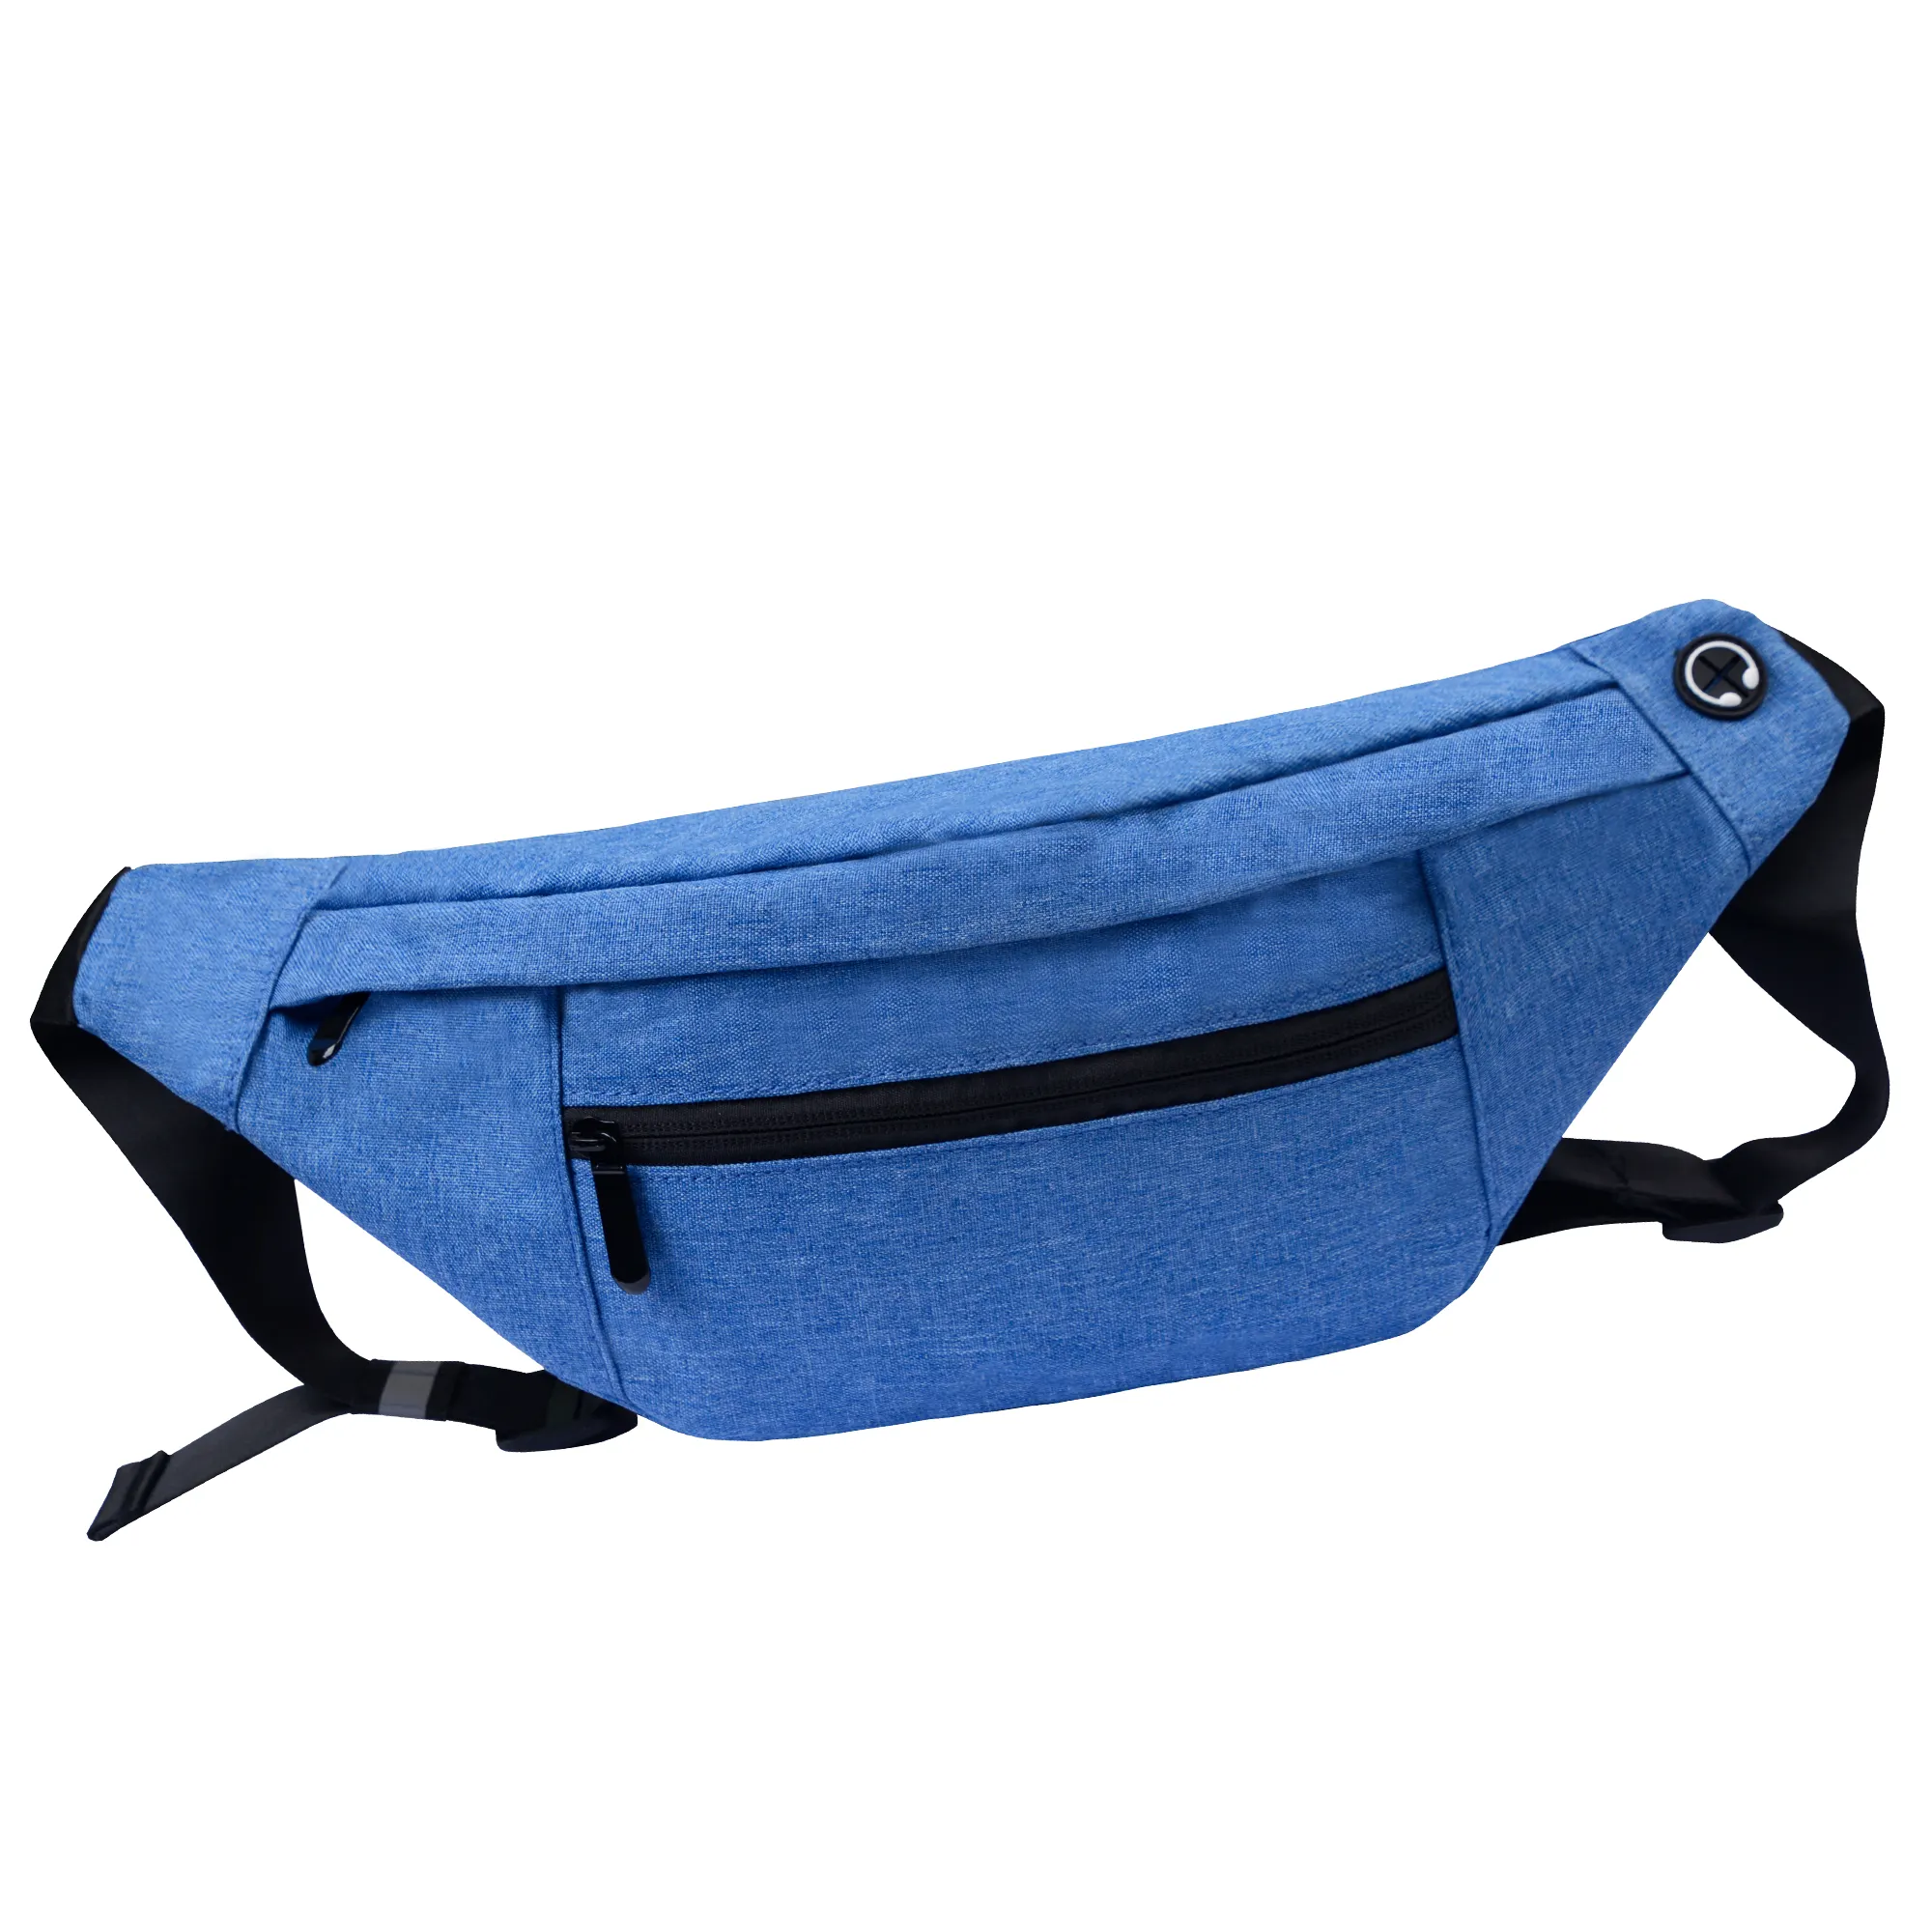 Large Crossbody Fanny Pack with 4-Zipper Pockets,Gifts for Enjoy Sports Workout Traveling Running Hands-Free Waist Bag